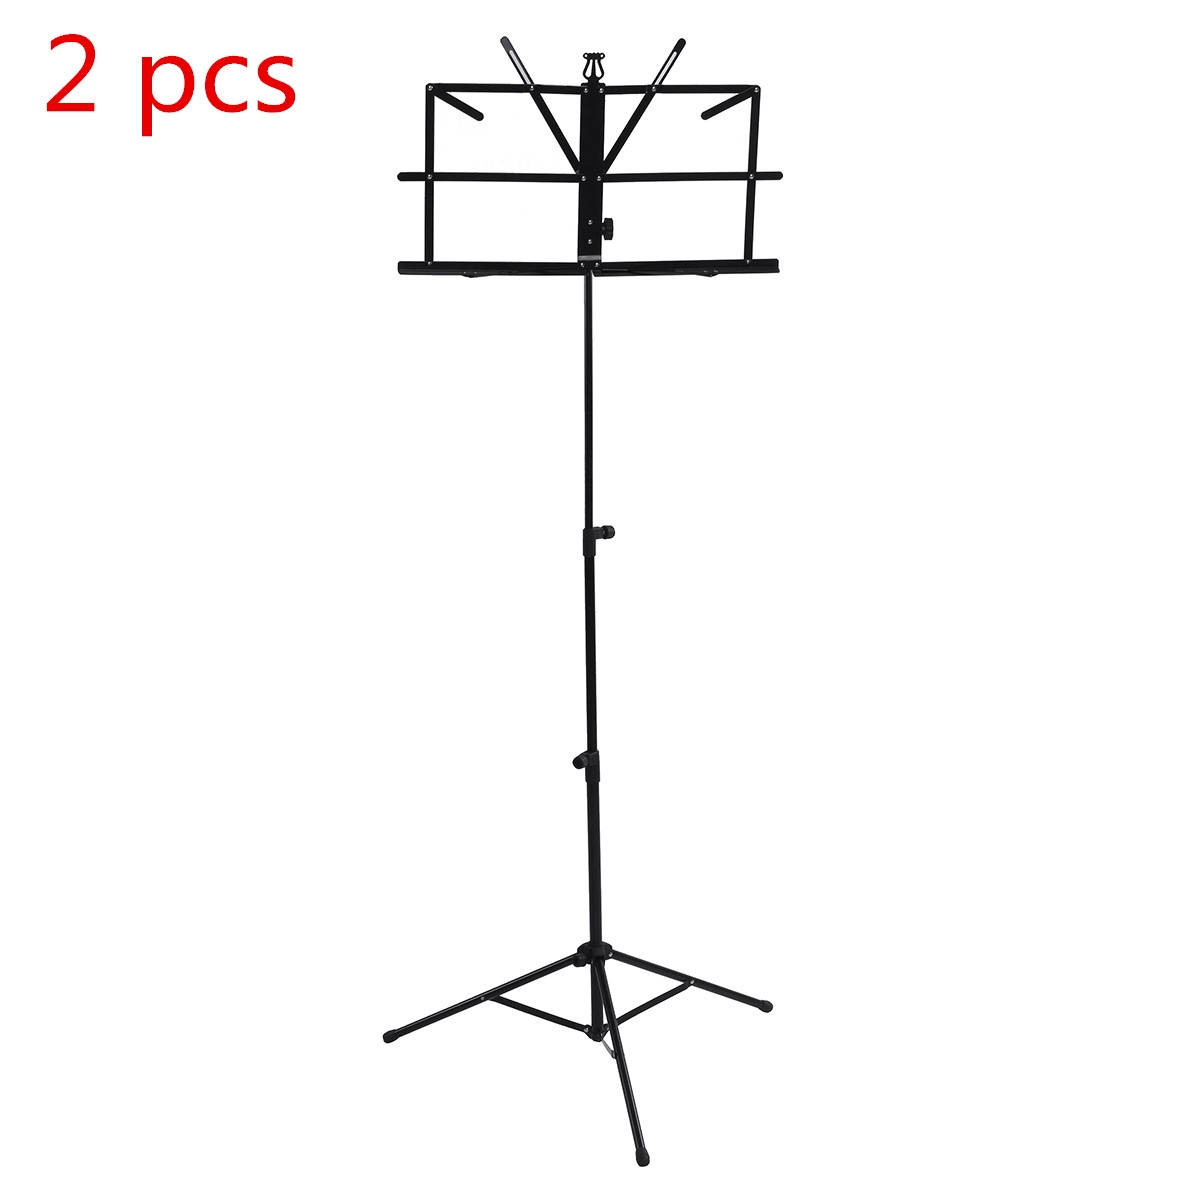 2PCS Foldable Aluminum Alloy Guitar Stand Holder Music Sheet Tripod Stand Height Adjustable with Carry Bag for Musical Instrument